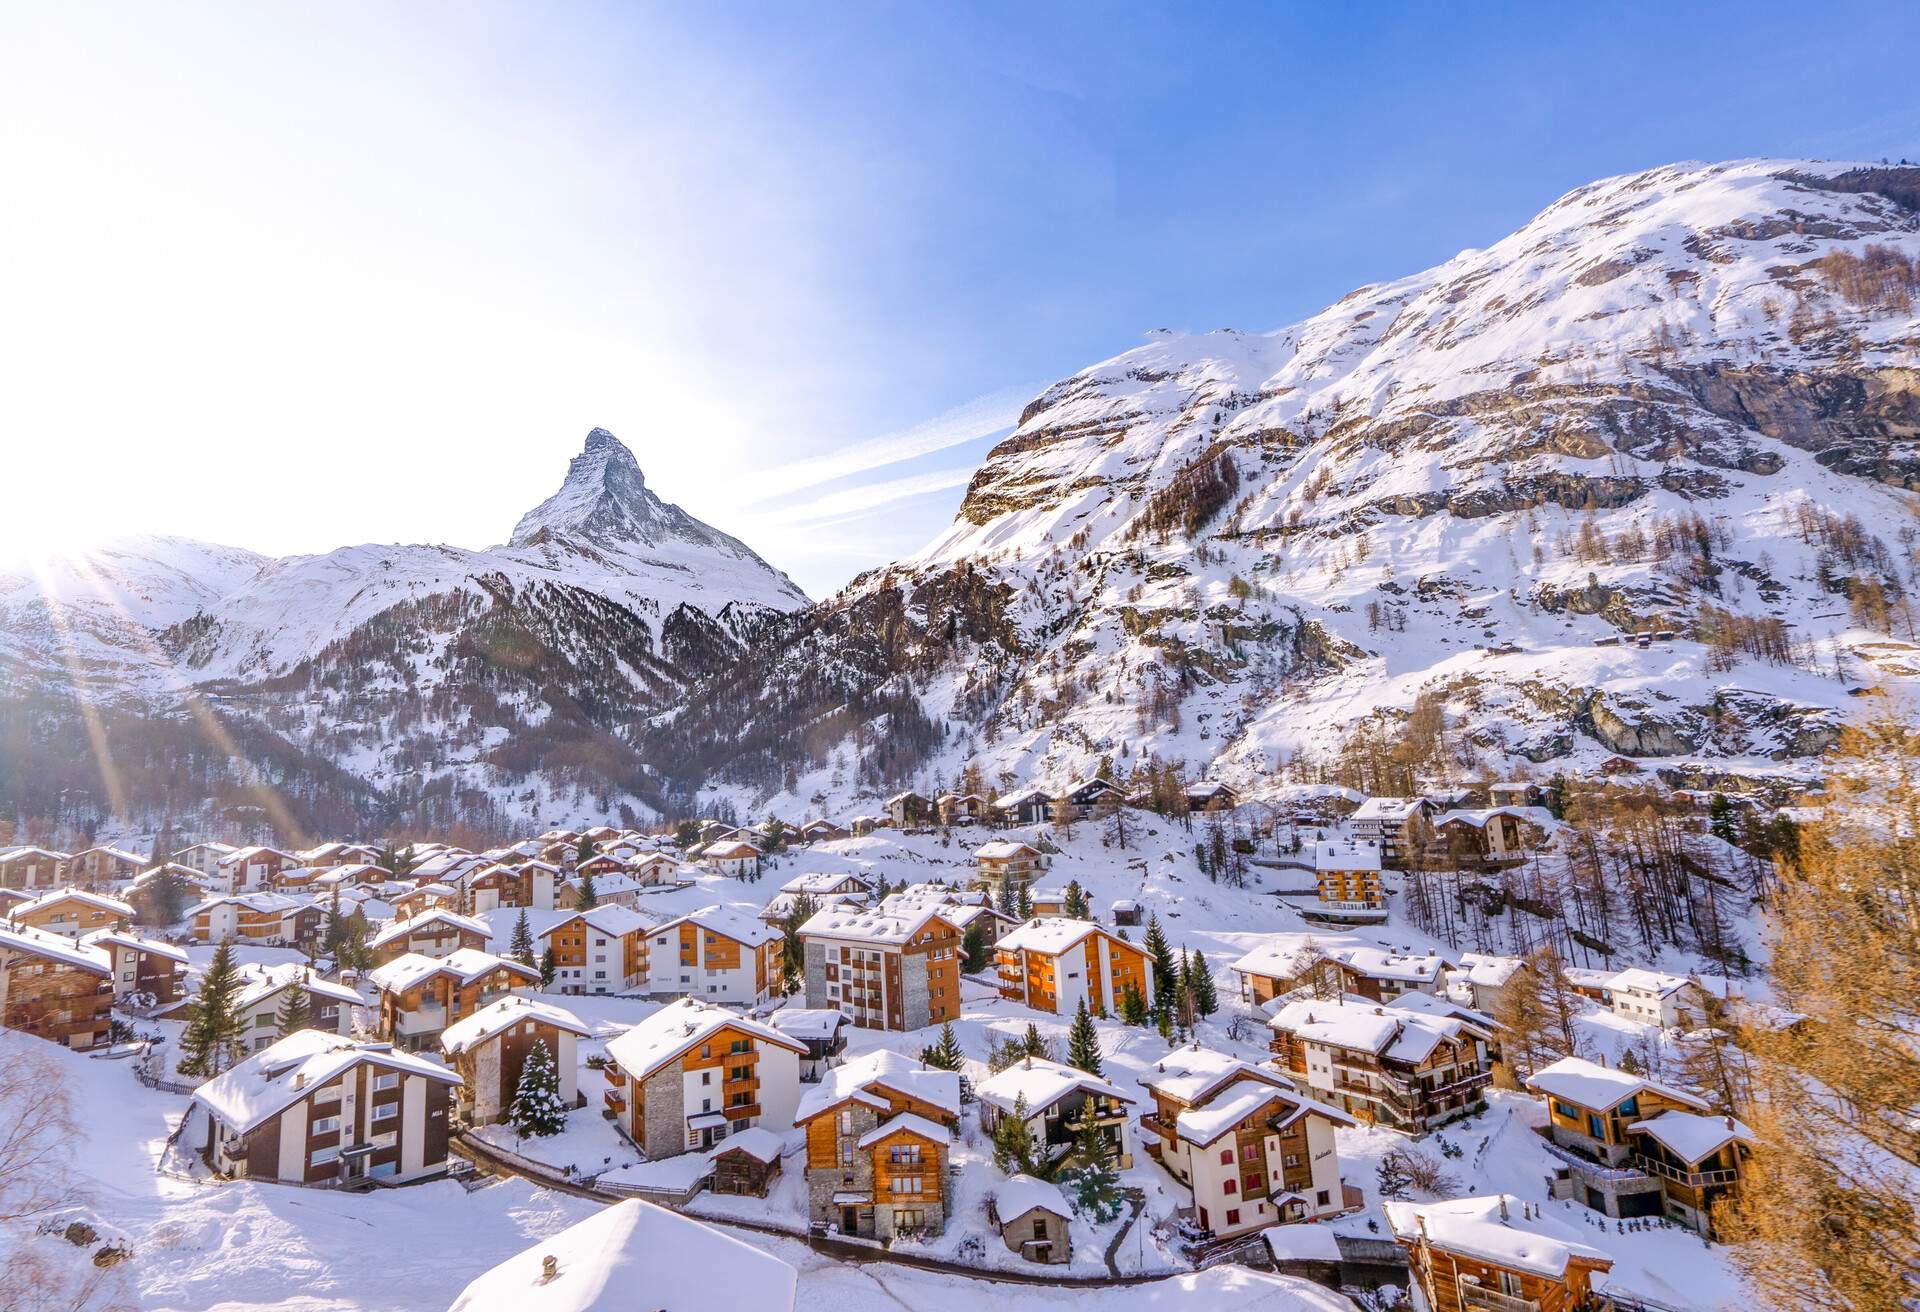 A charming snow-covered town nestled in the heart of a breathtaking landscape, embraced by towering rocky mountains.